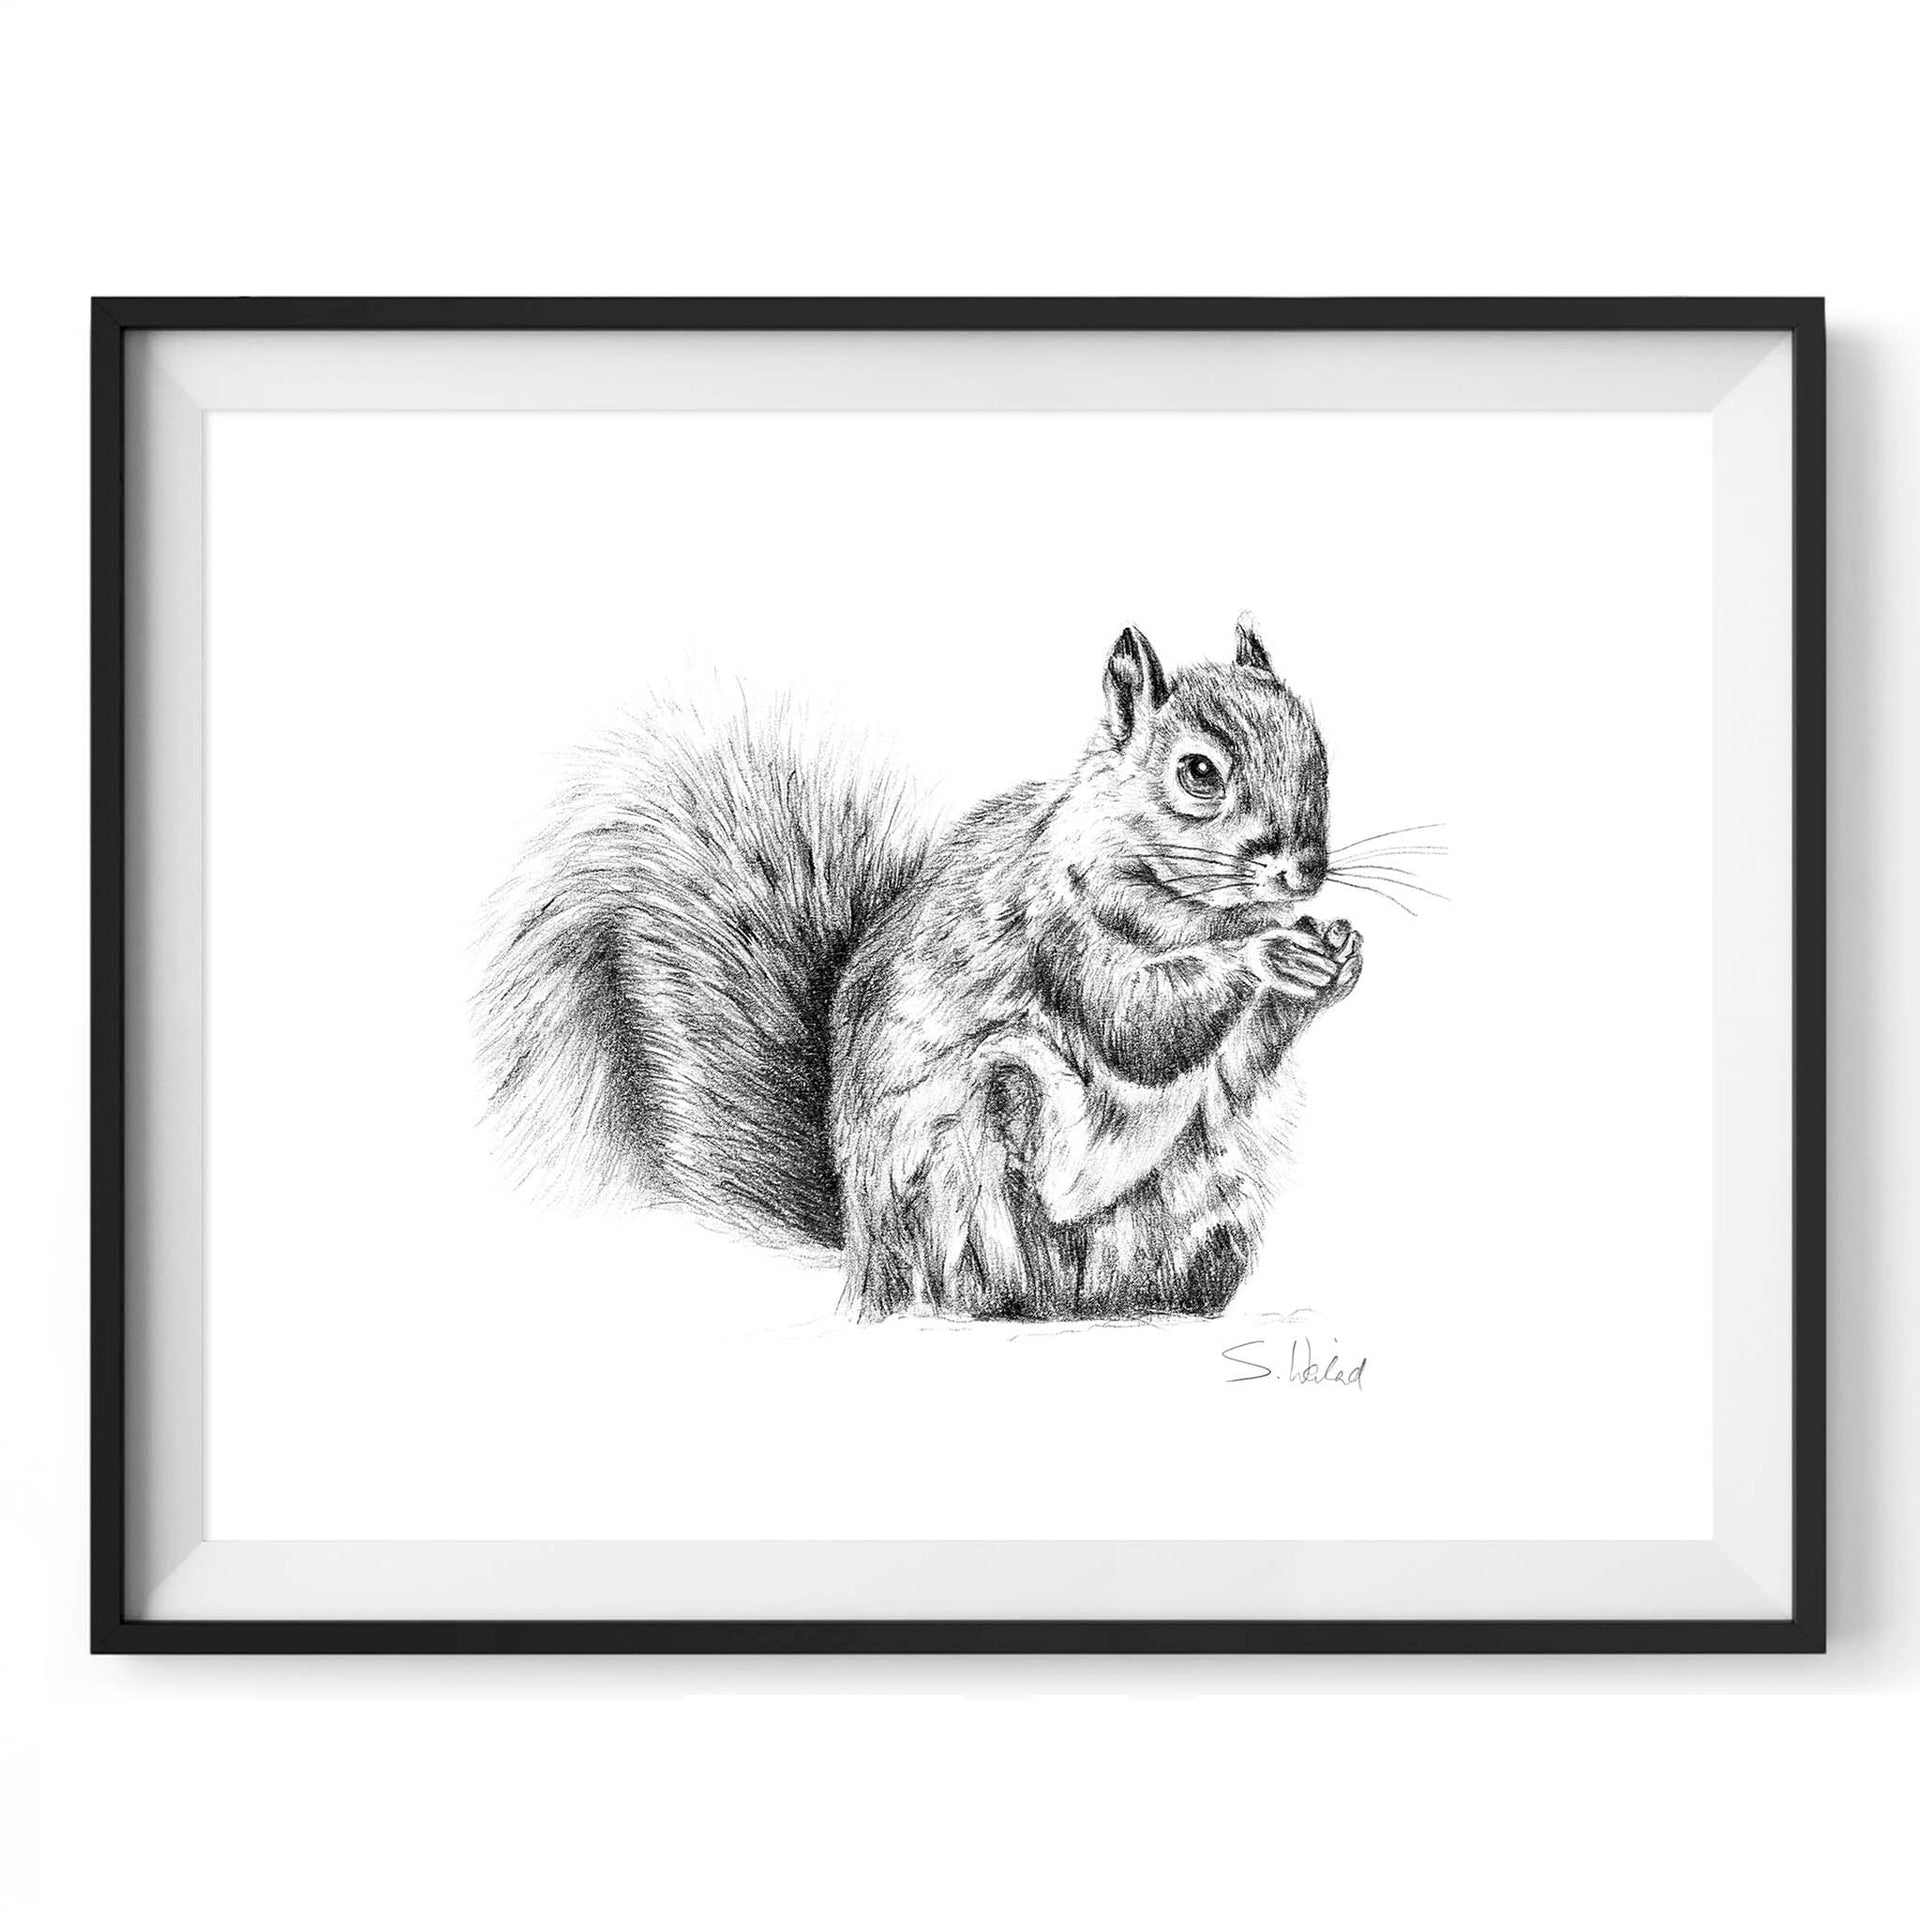 Pencil drawing of a squirrel limited edition print in black frame